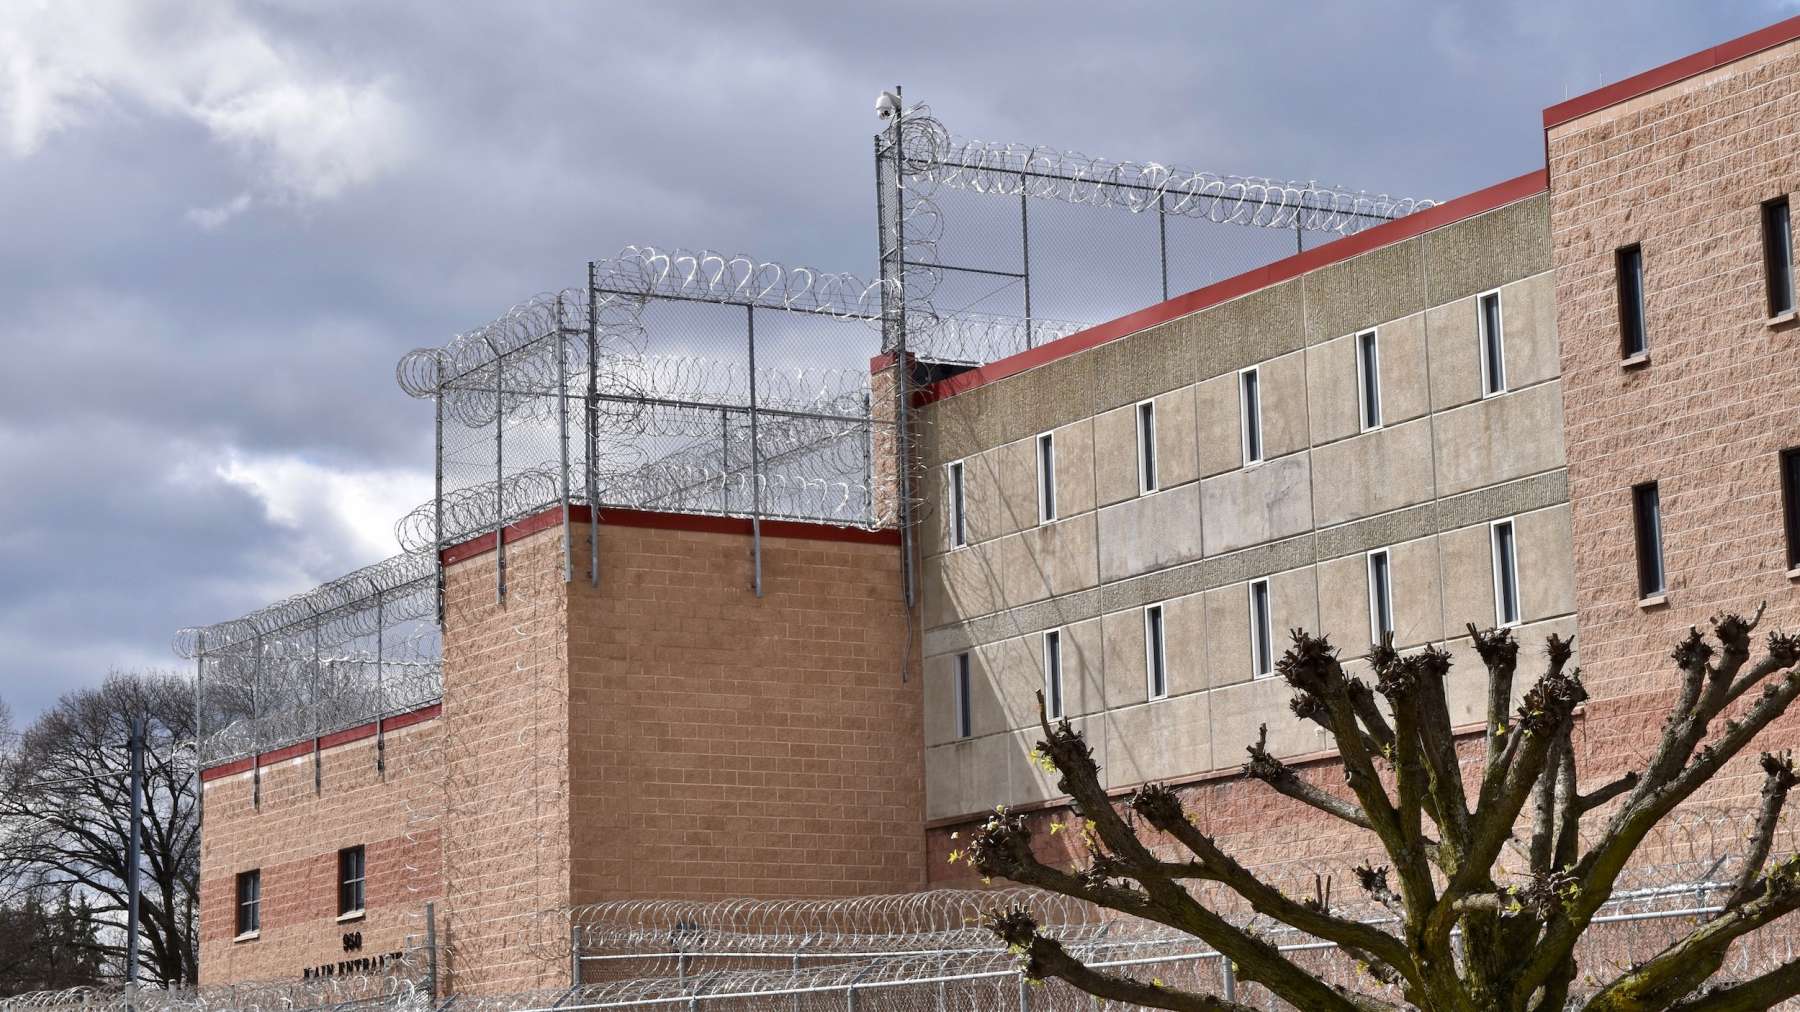 Rhode Island News: Three Wyatt detainees allege unhygienic conditions, petition for release